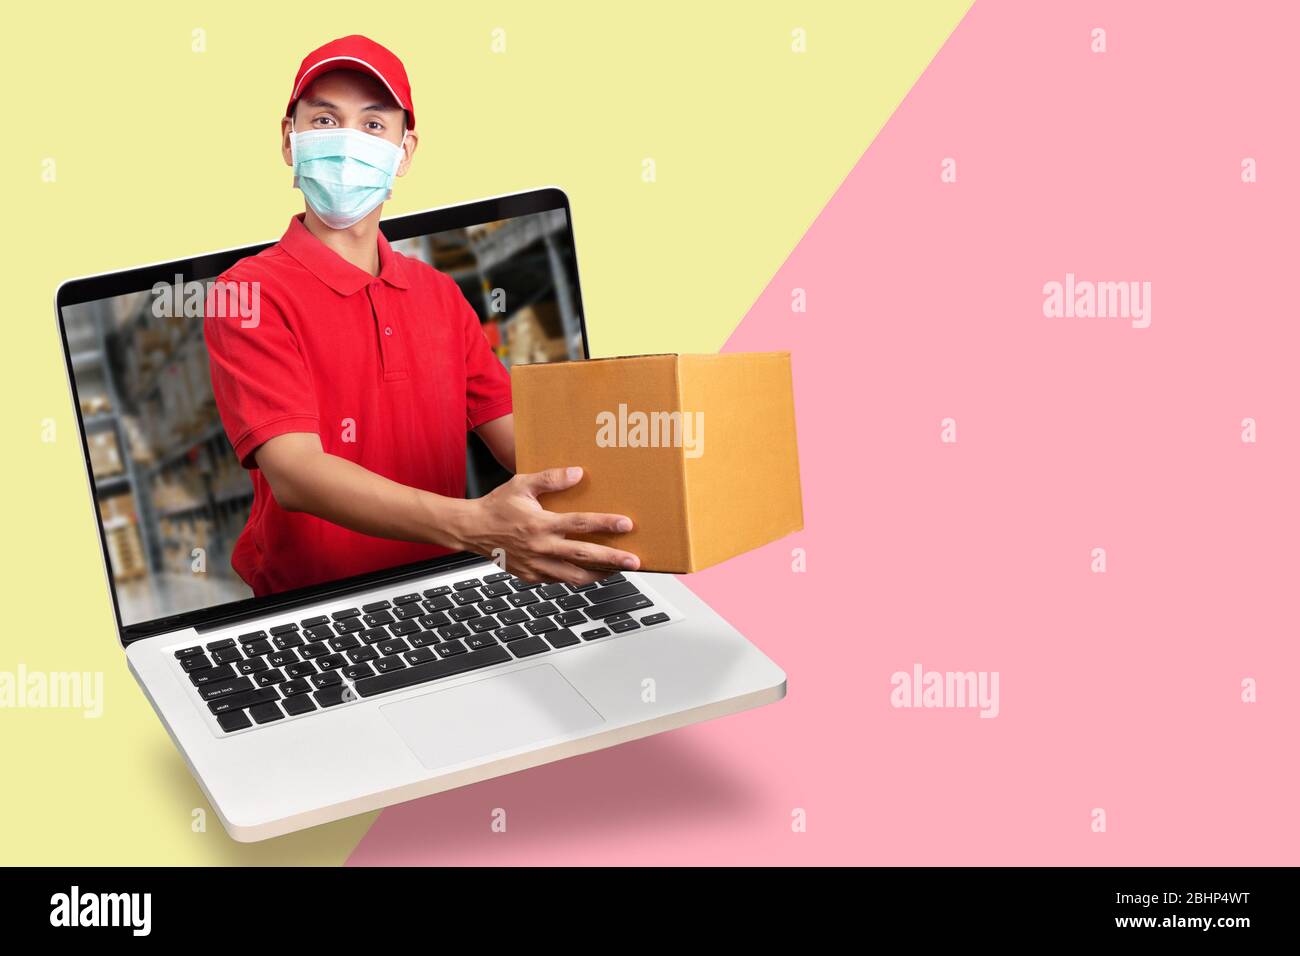 delivery man in red shirt with hygienic mask, holding goods order in package parcel out from laptop computer with warehouse background. order online, Stock Photo